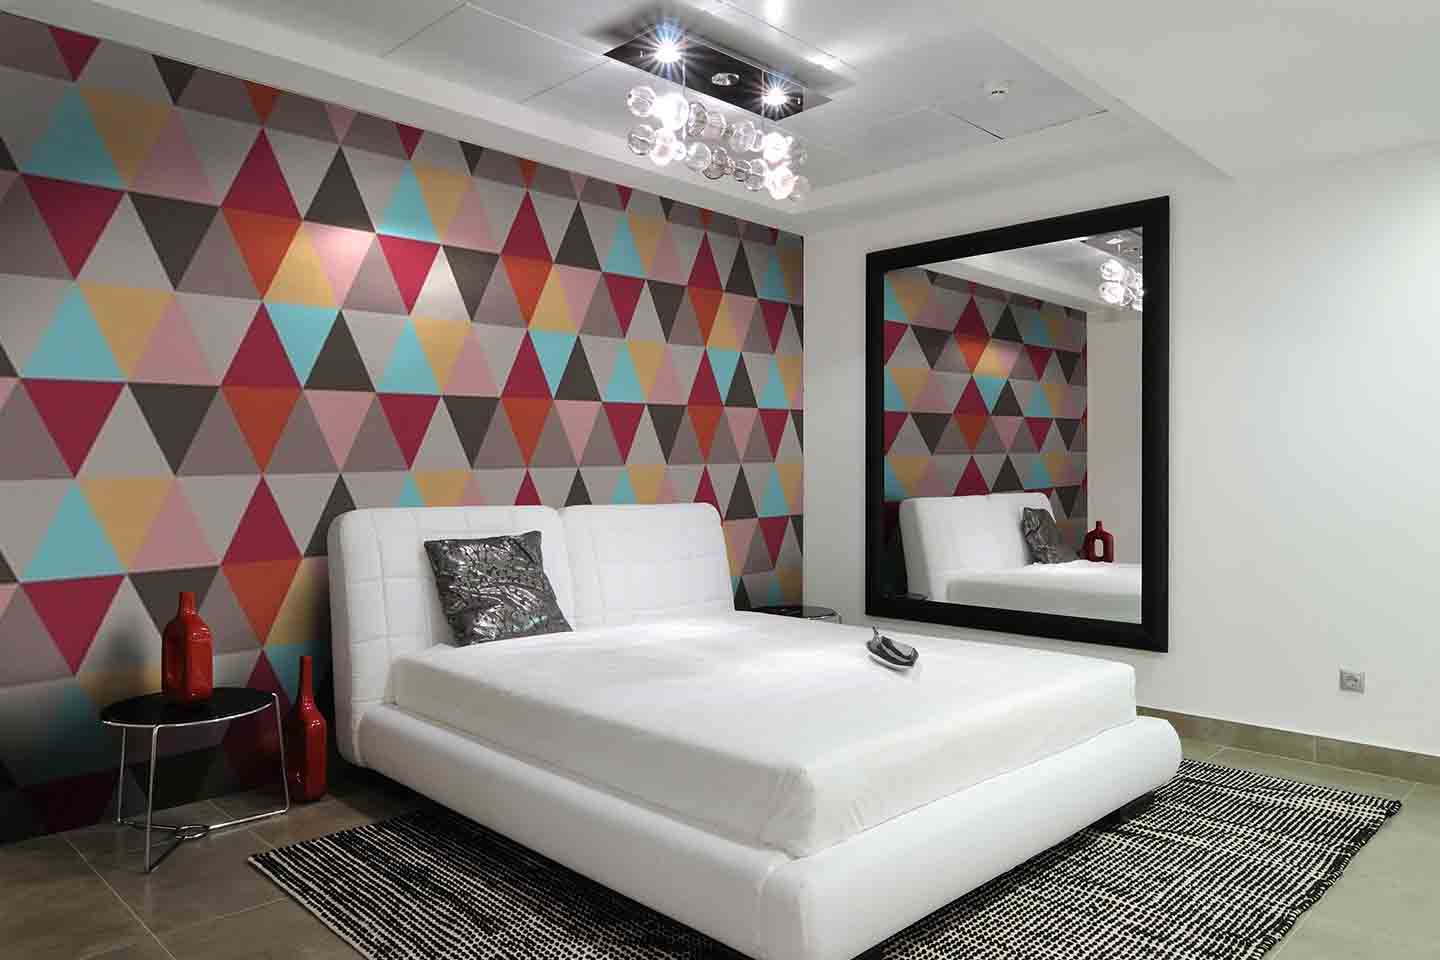 16 Stunning Bedroom Wallpaper Ideas That Will Transform Your